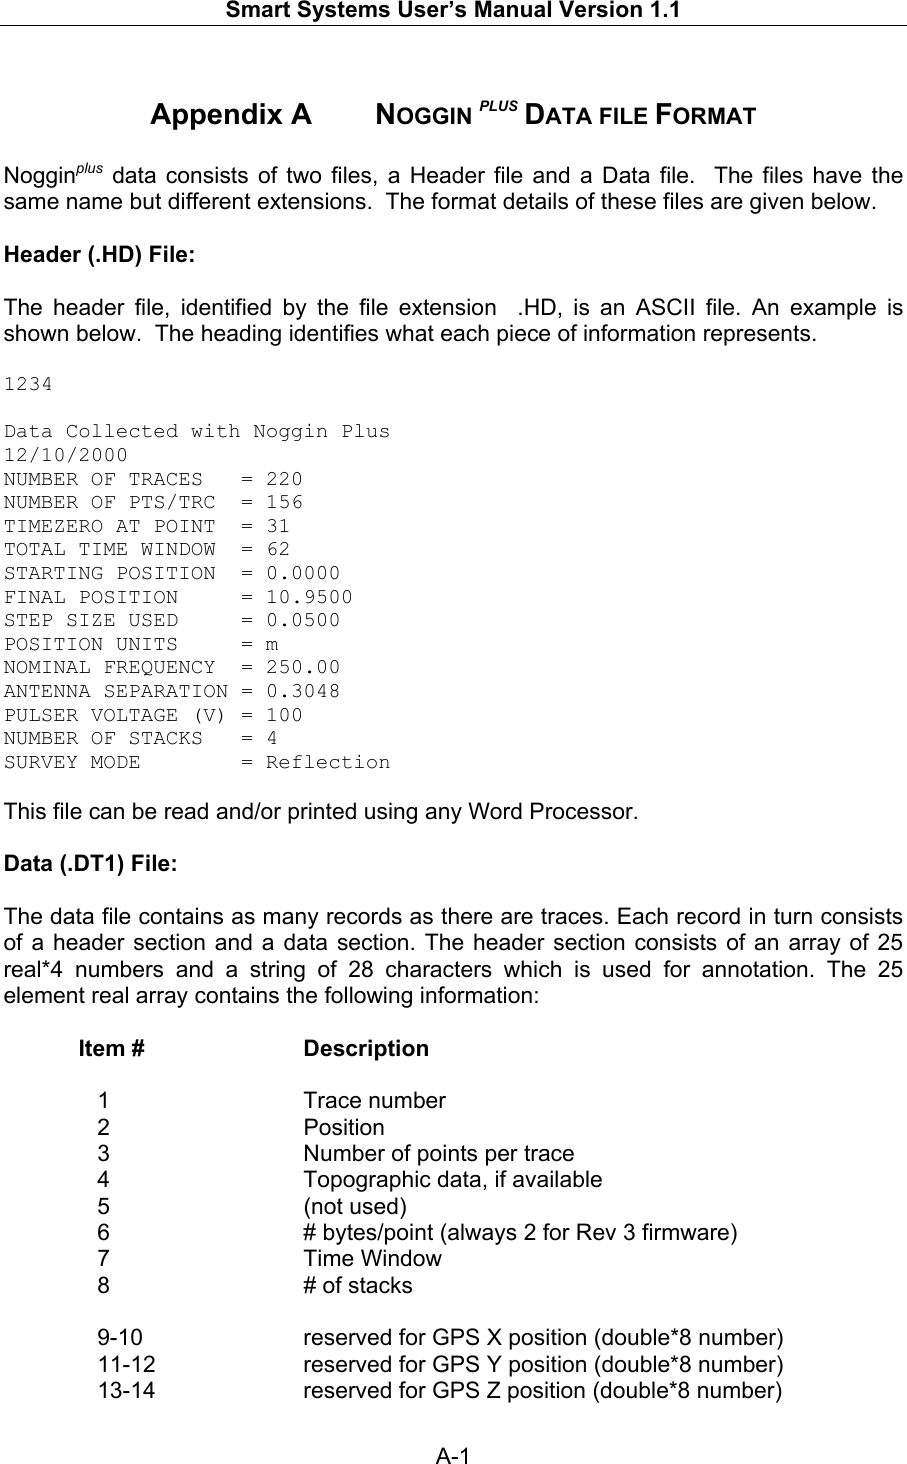   Smart Systems User’s Manual Version 1.1  A-1   Appendix A   NOGGIN PLUS DATA FILE FORMAT Nogginplus data consists of two files, a Header file and a Data file.  The files have the same name but different extensions.  The format details of these files are given below.  Header (.HD) File:  The header file, identified by the file extension  .HD, is an ASCII file. An example is shown below.  The heading identifies what each piece of information represents.  1234  Data Collected with Noggin Plus 12/10/2000  NUMBER OF TRACES   = 220  NUMBER OF PTS/TRC  = 156  TIMEZERO AT POINT  = 31  TOTAL TIME WINDOW  = 62  STARTING POSITION  = 0.0000  FINAL POSITION     = 10.9500  STEP SIZE USED     = 0.0500  POSITION UNITS     = m  NOMINAL FREQUENCY  = 250.00  ANTENNA SEPARATION = 0.3048  PULSER VOLTAGE (V) = 100  NUMBER OF STACKS   = 4  SURVEY MODE        = Reflection   This file can be read and/or printed using any Word Processor.  Data (.DT1) File:  The data file contains as many records as there are traces. Each record in turn consists of a header section and a data section. The header section consists of an array of 25 real*4 numbers and a string of 28 characters which is used for annotation. The 25 element real array contains the following information:   Item #  Description   1  Trace number  2  Position   3  Number of points per trace   4  Topographic data, if available  5  (not used)   6  # bytes/point (always 2 for Rev 3 firmware)  7  Time Window 8  # of stacks  9-10  reserved for GPS X position (double*8 number) 11-12  reserved for GPS Y position (double*8 number) 13-14  reserved for GPS Z position (double*8 number) 